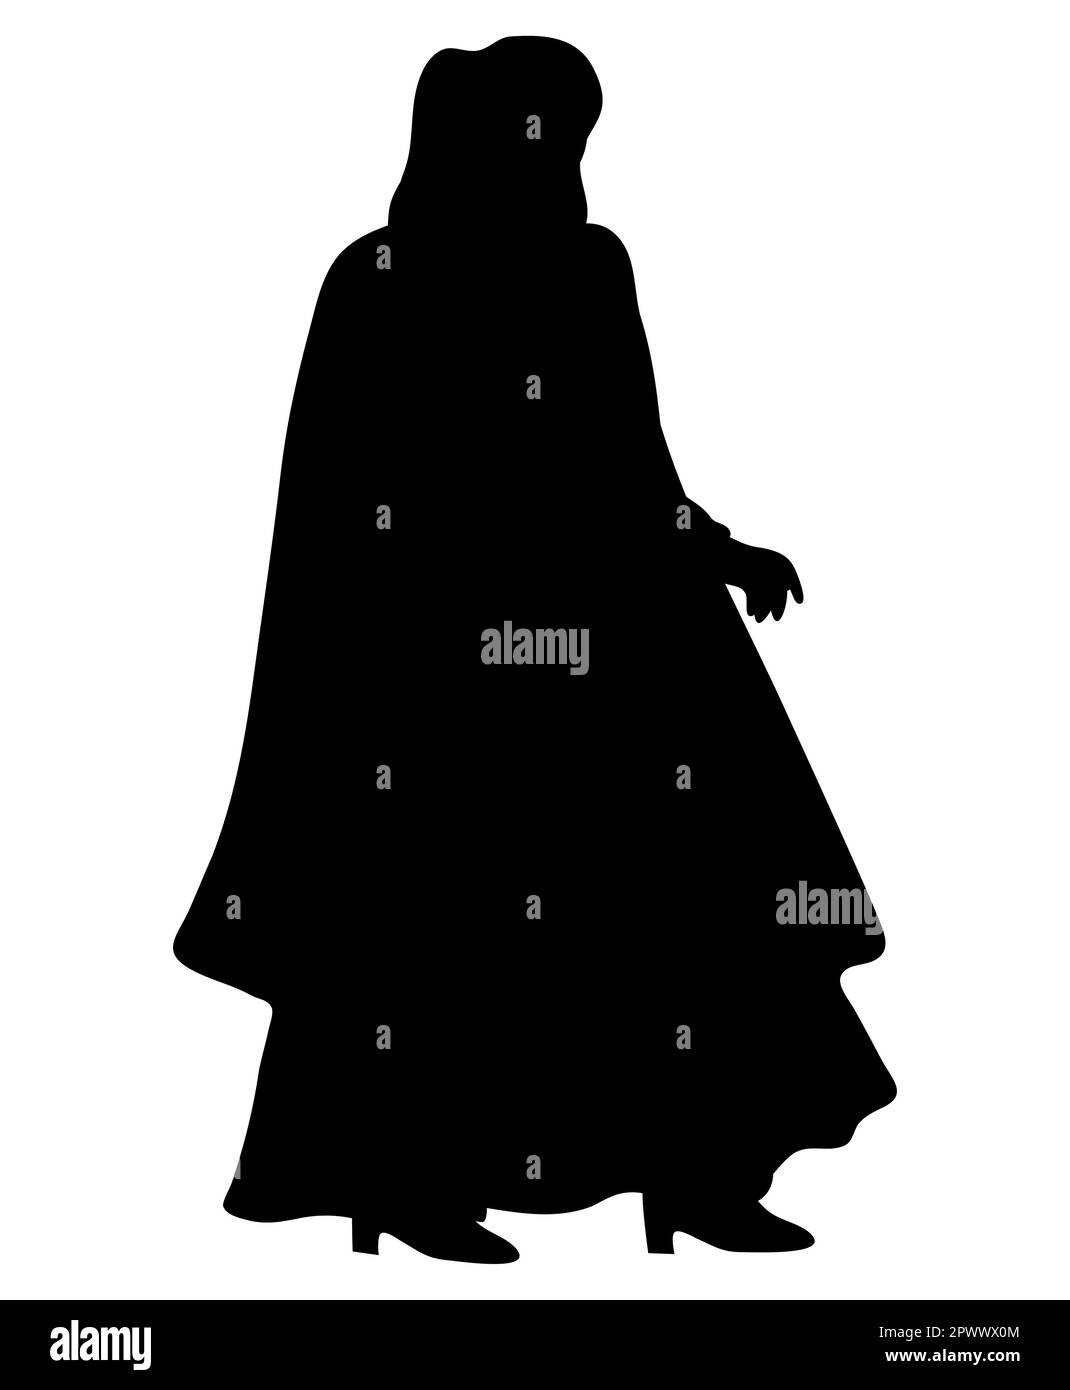 Black silhouette of a Muslim woman wearing an abaya, perfect logo for abaya brands Stock Vector